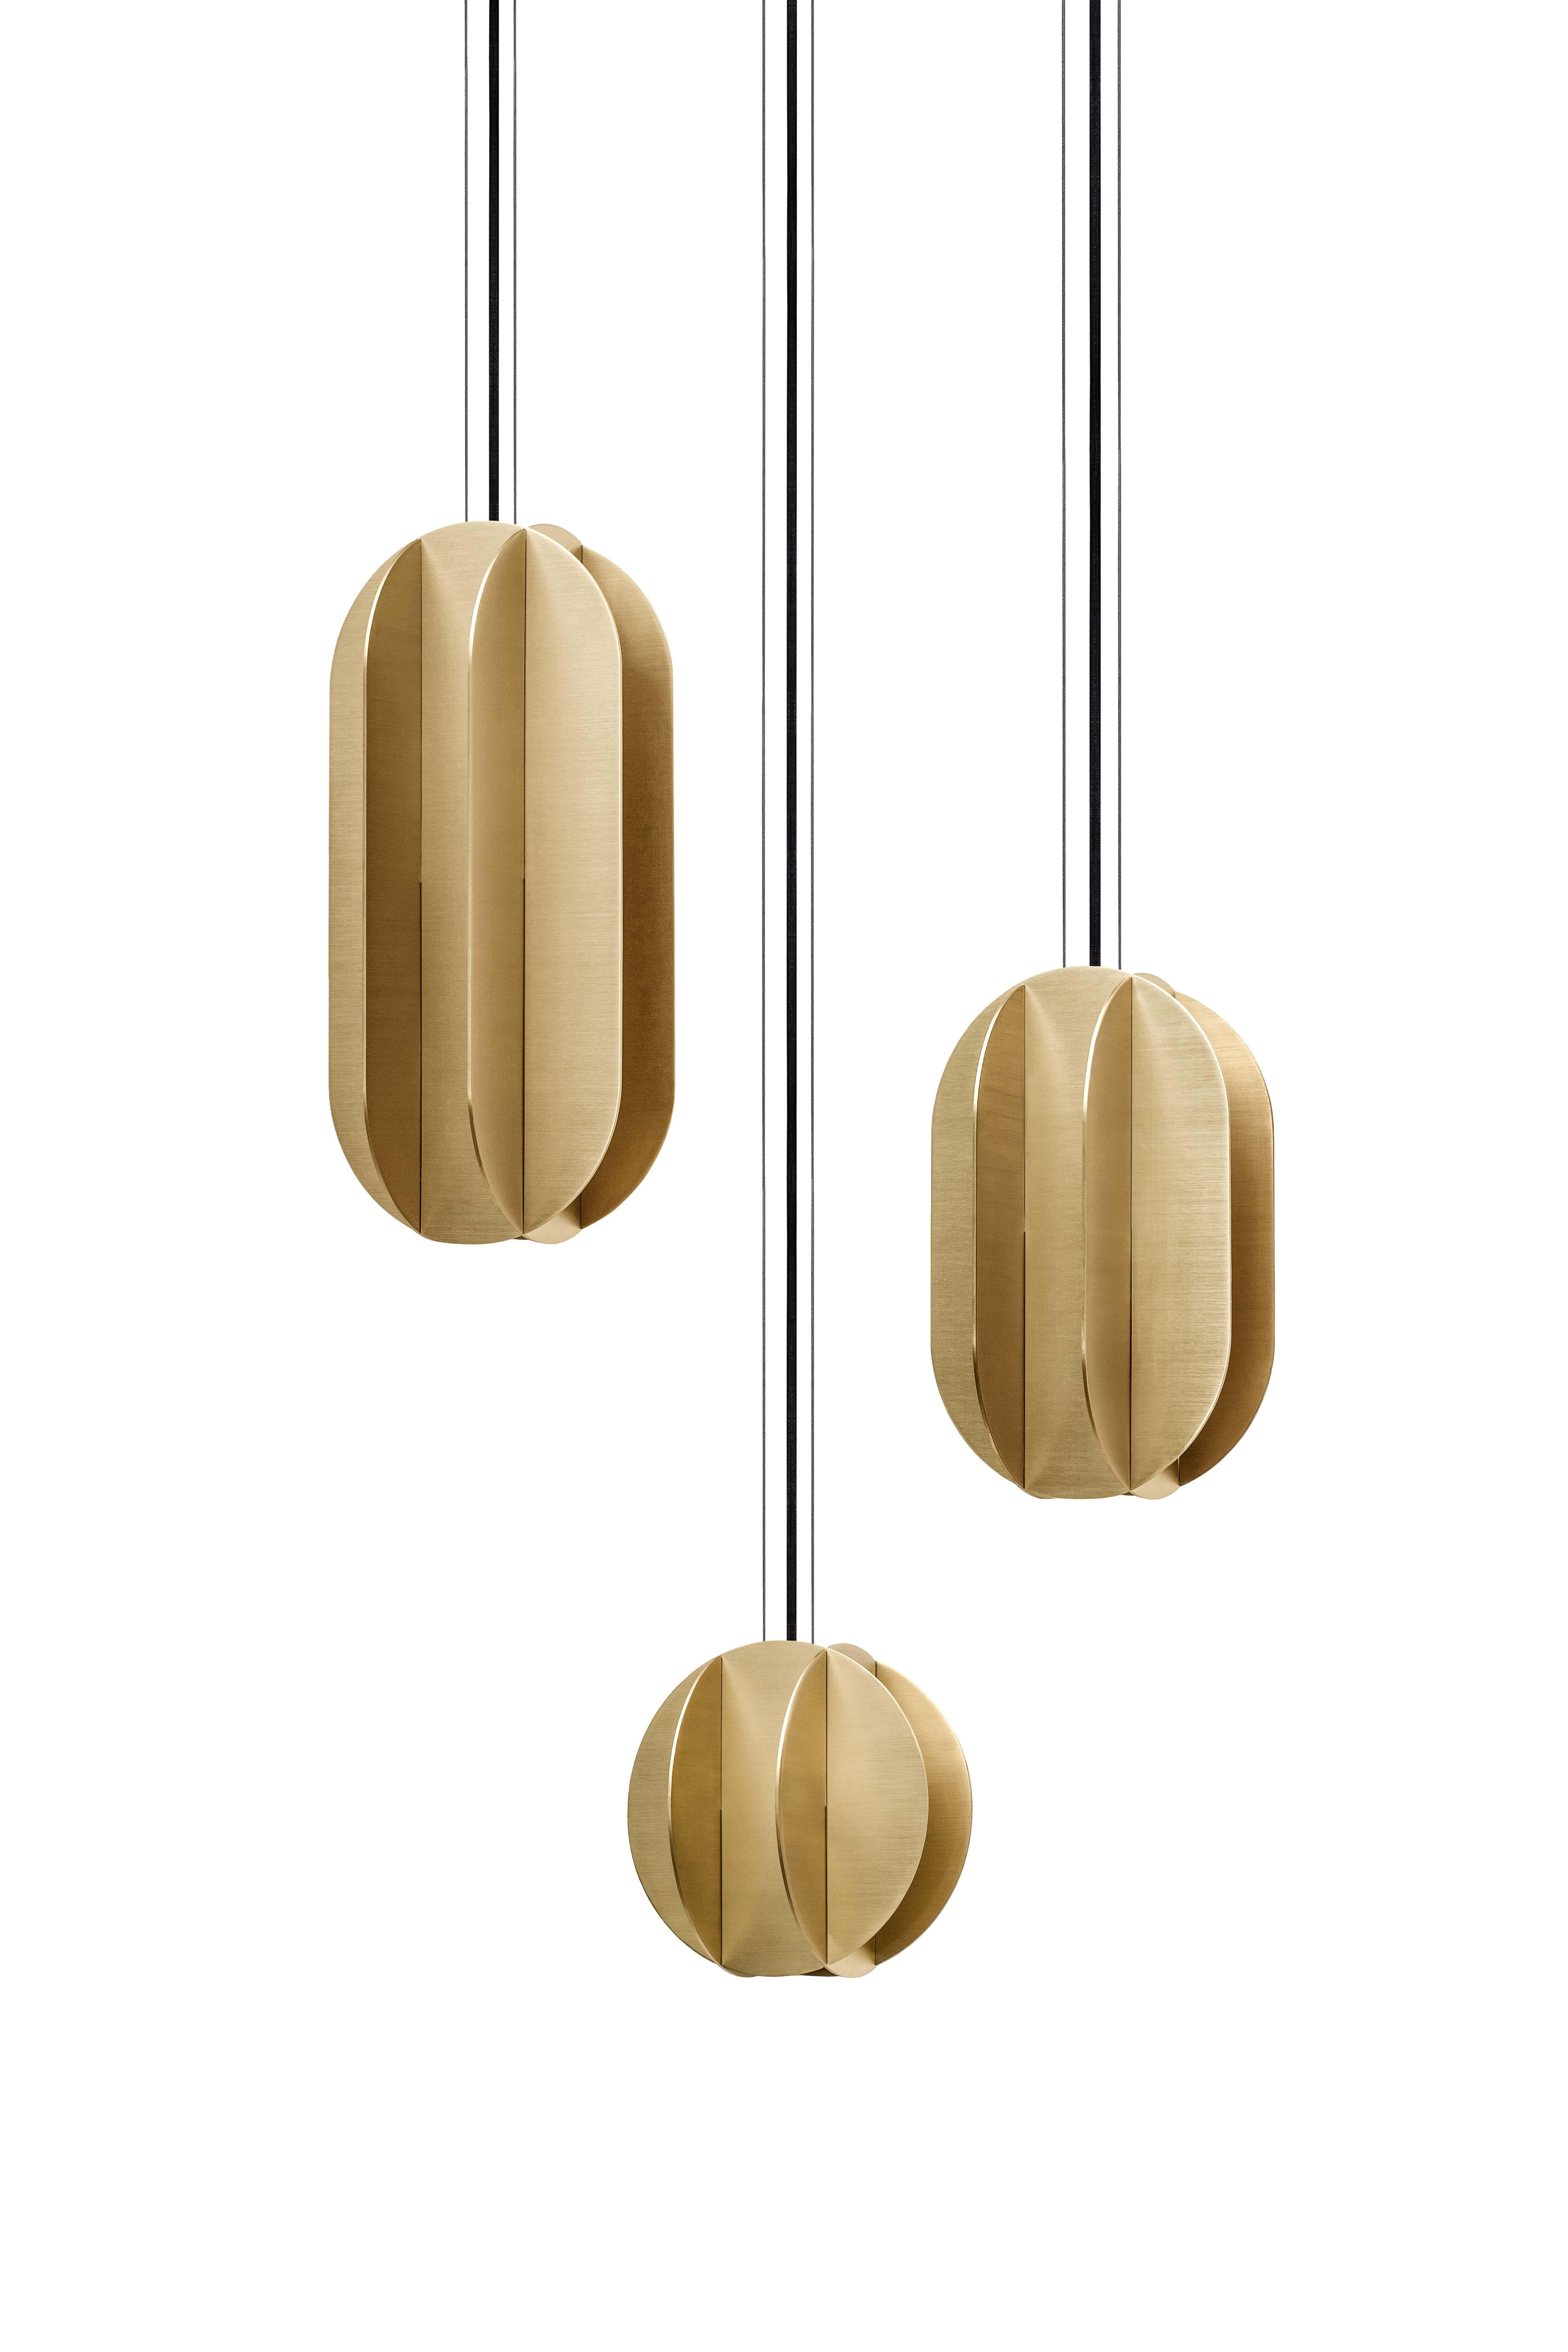 Contemporary Pendant Lamp EL Lamp small CS3 by NOOM in Stainless Steel 3